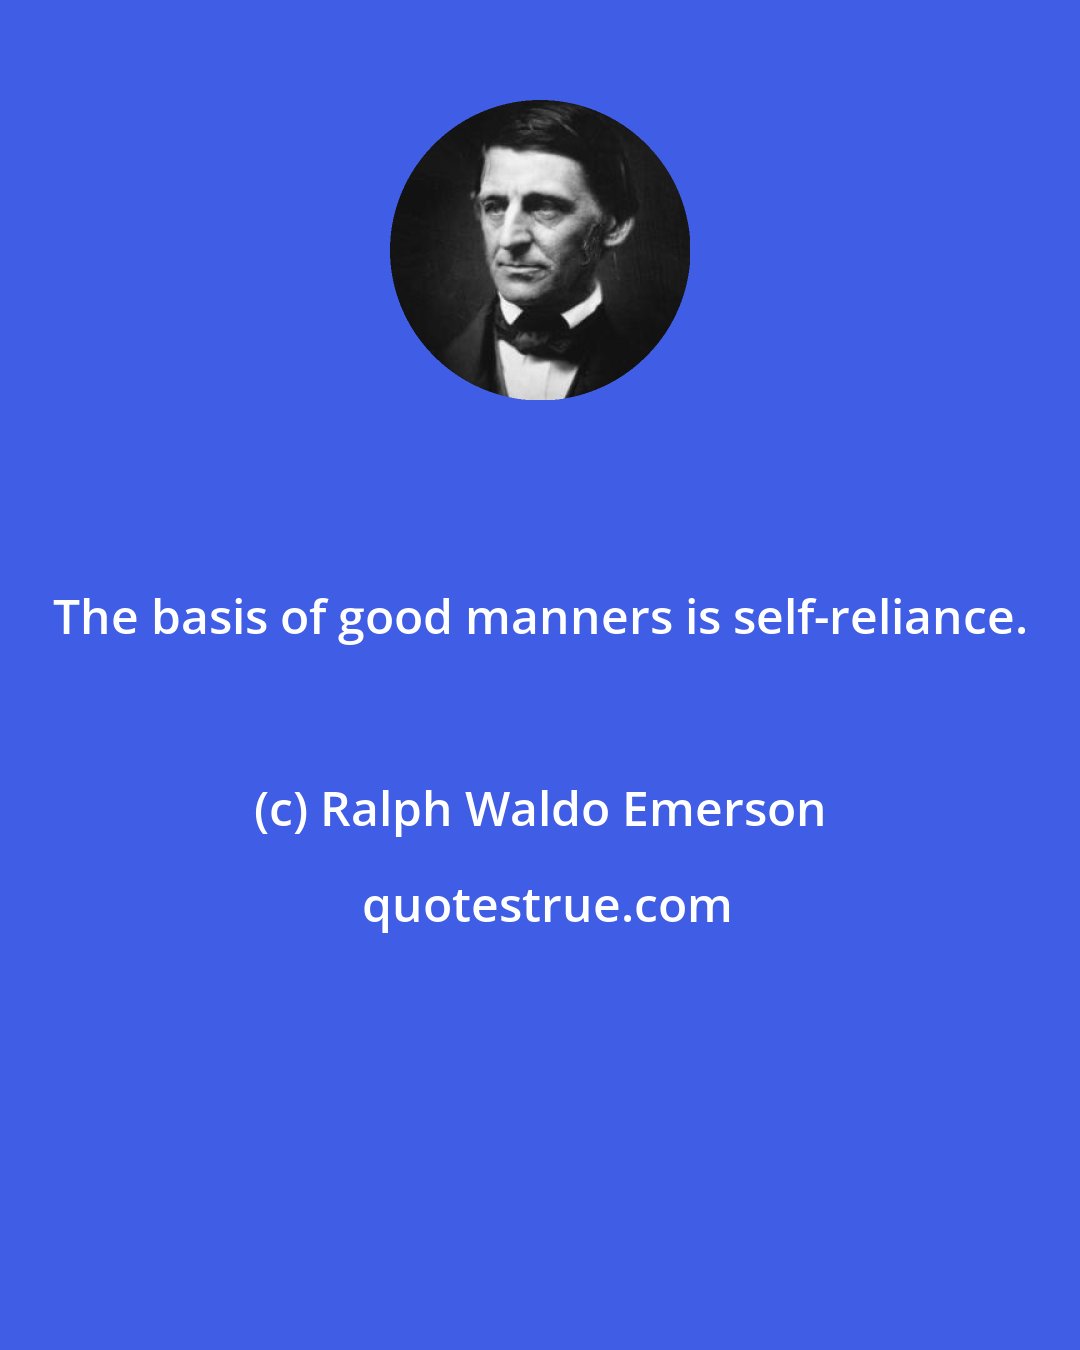 Ralph Waldo Emerson: The basis of good manners is self-reliance.